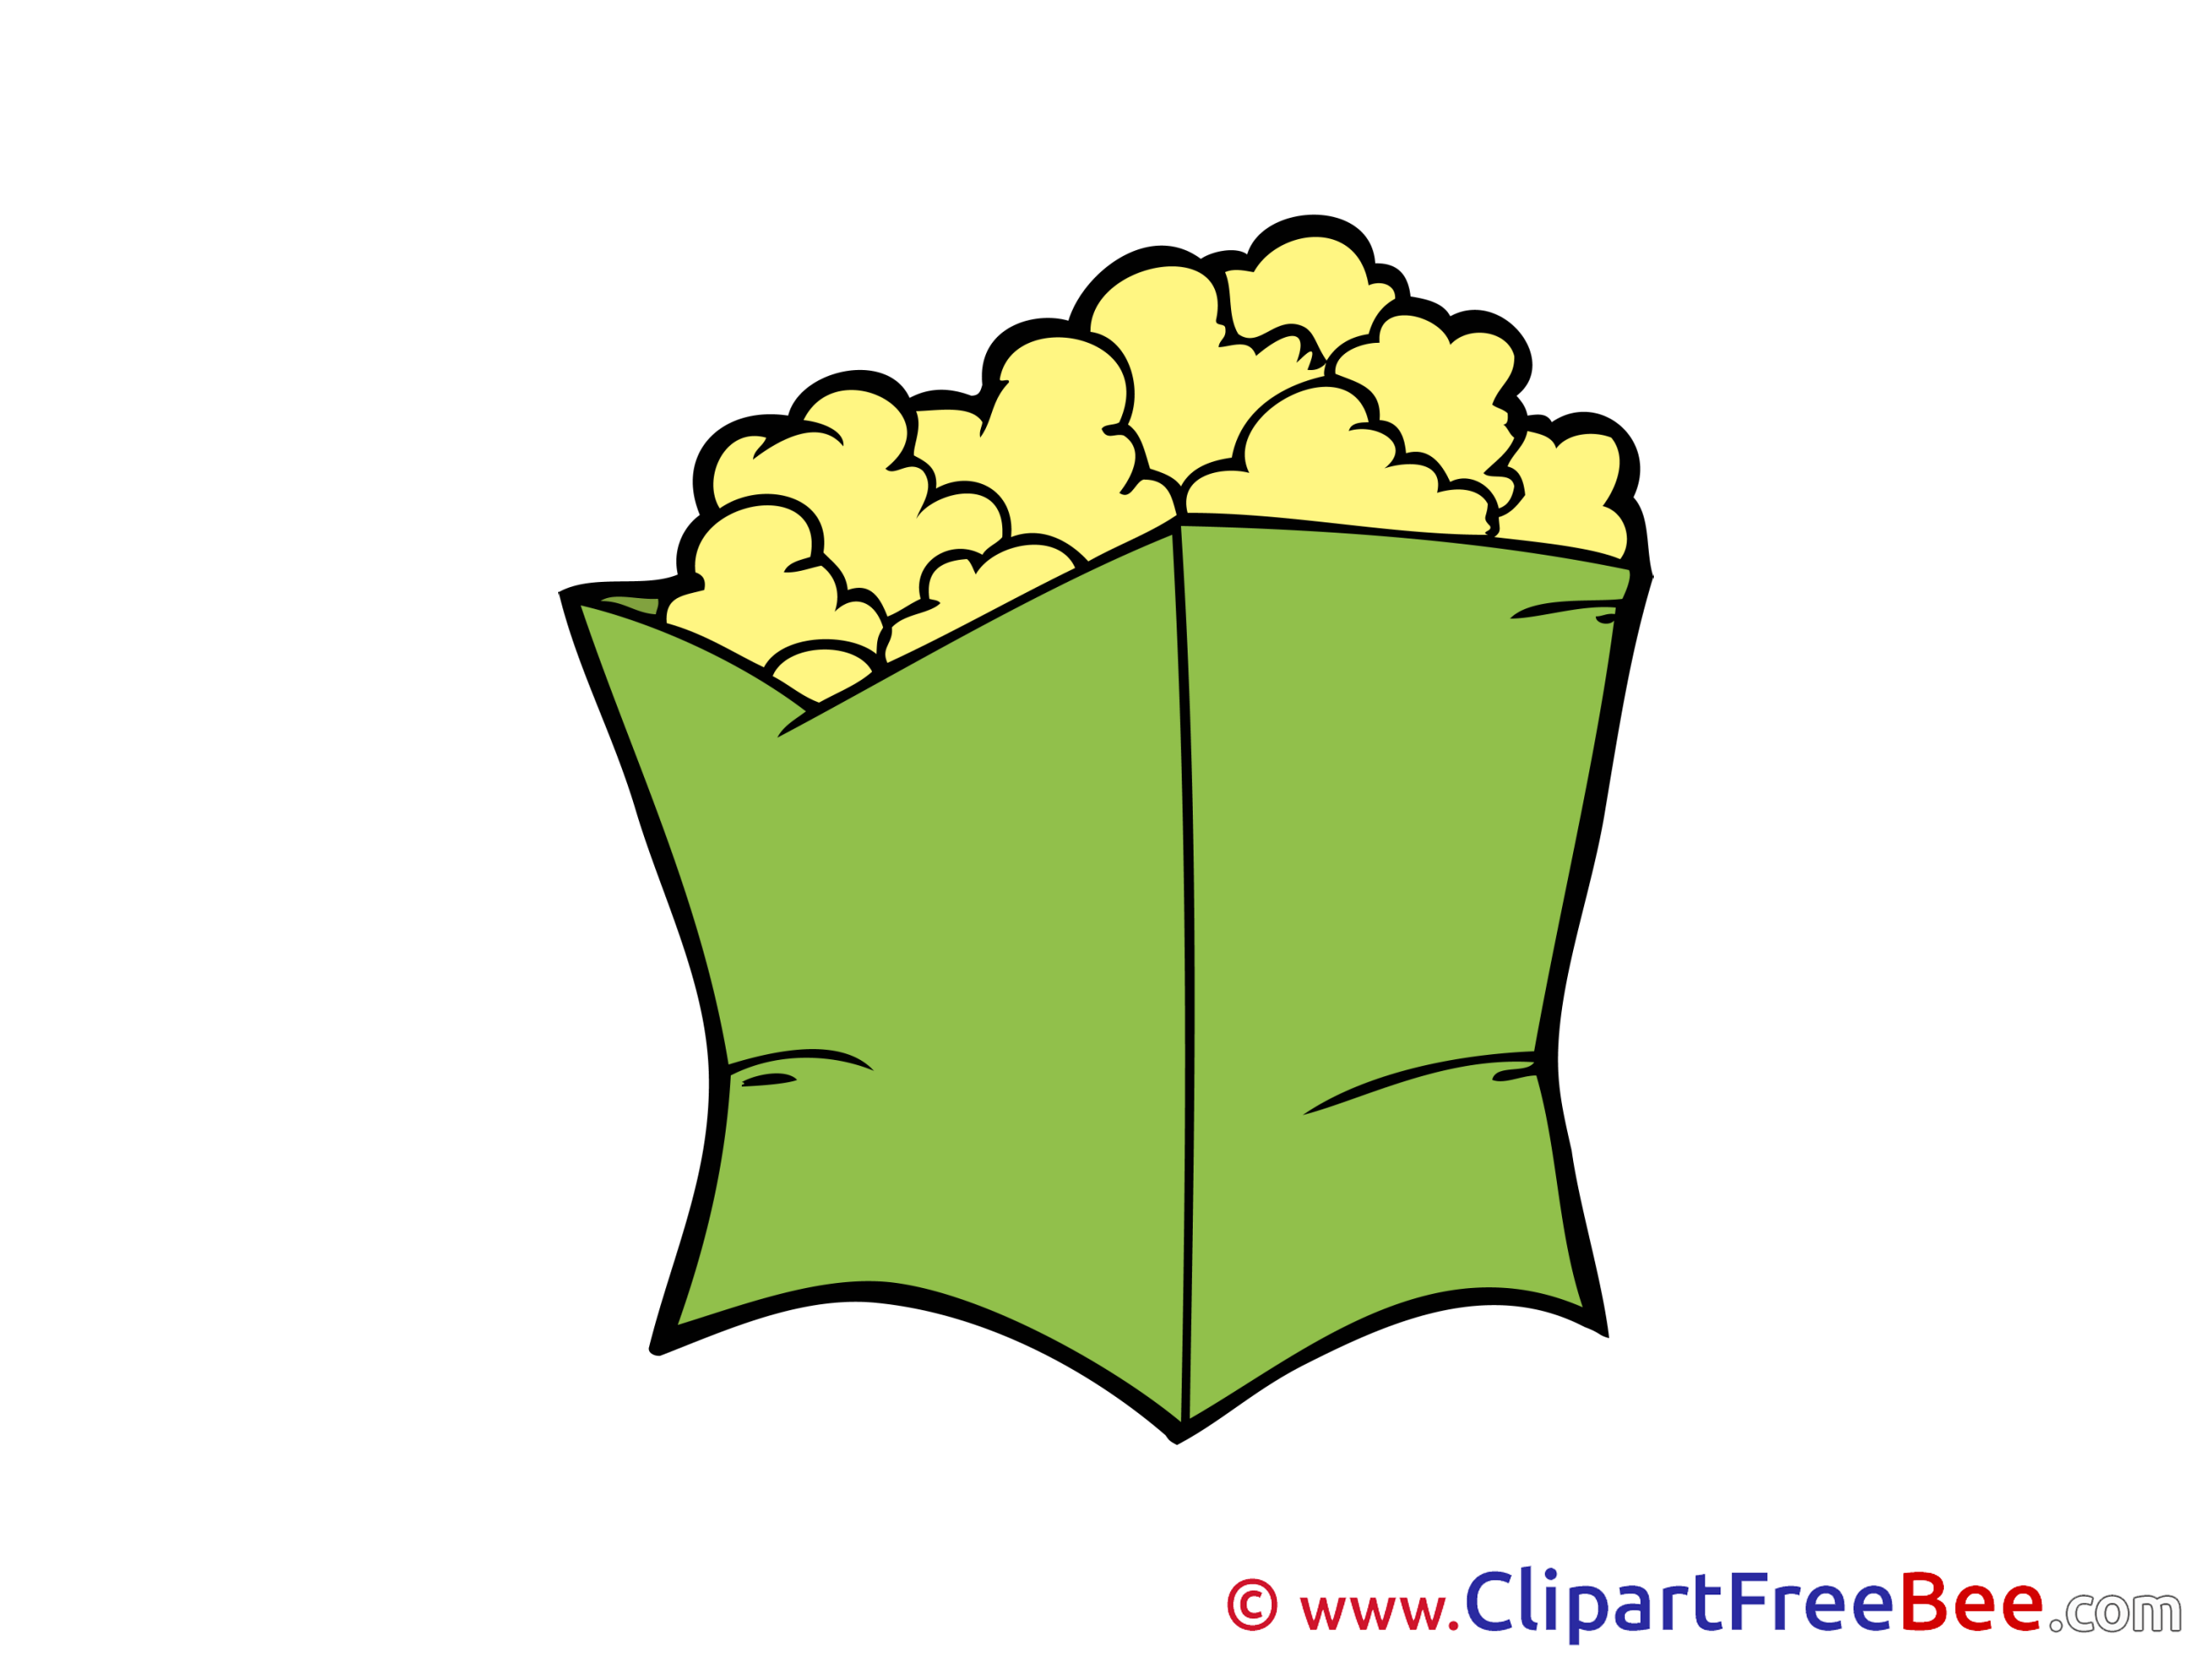 Popcorn Images download free Cliparts